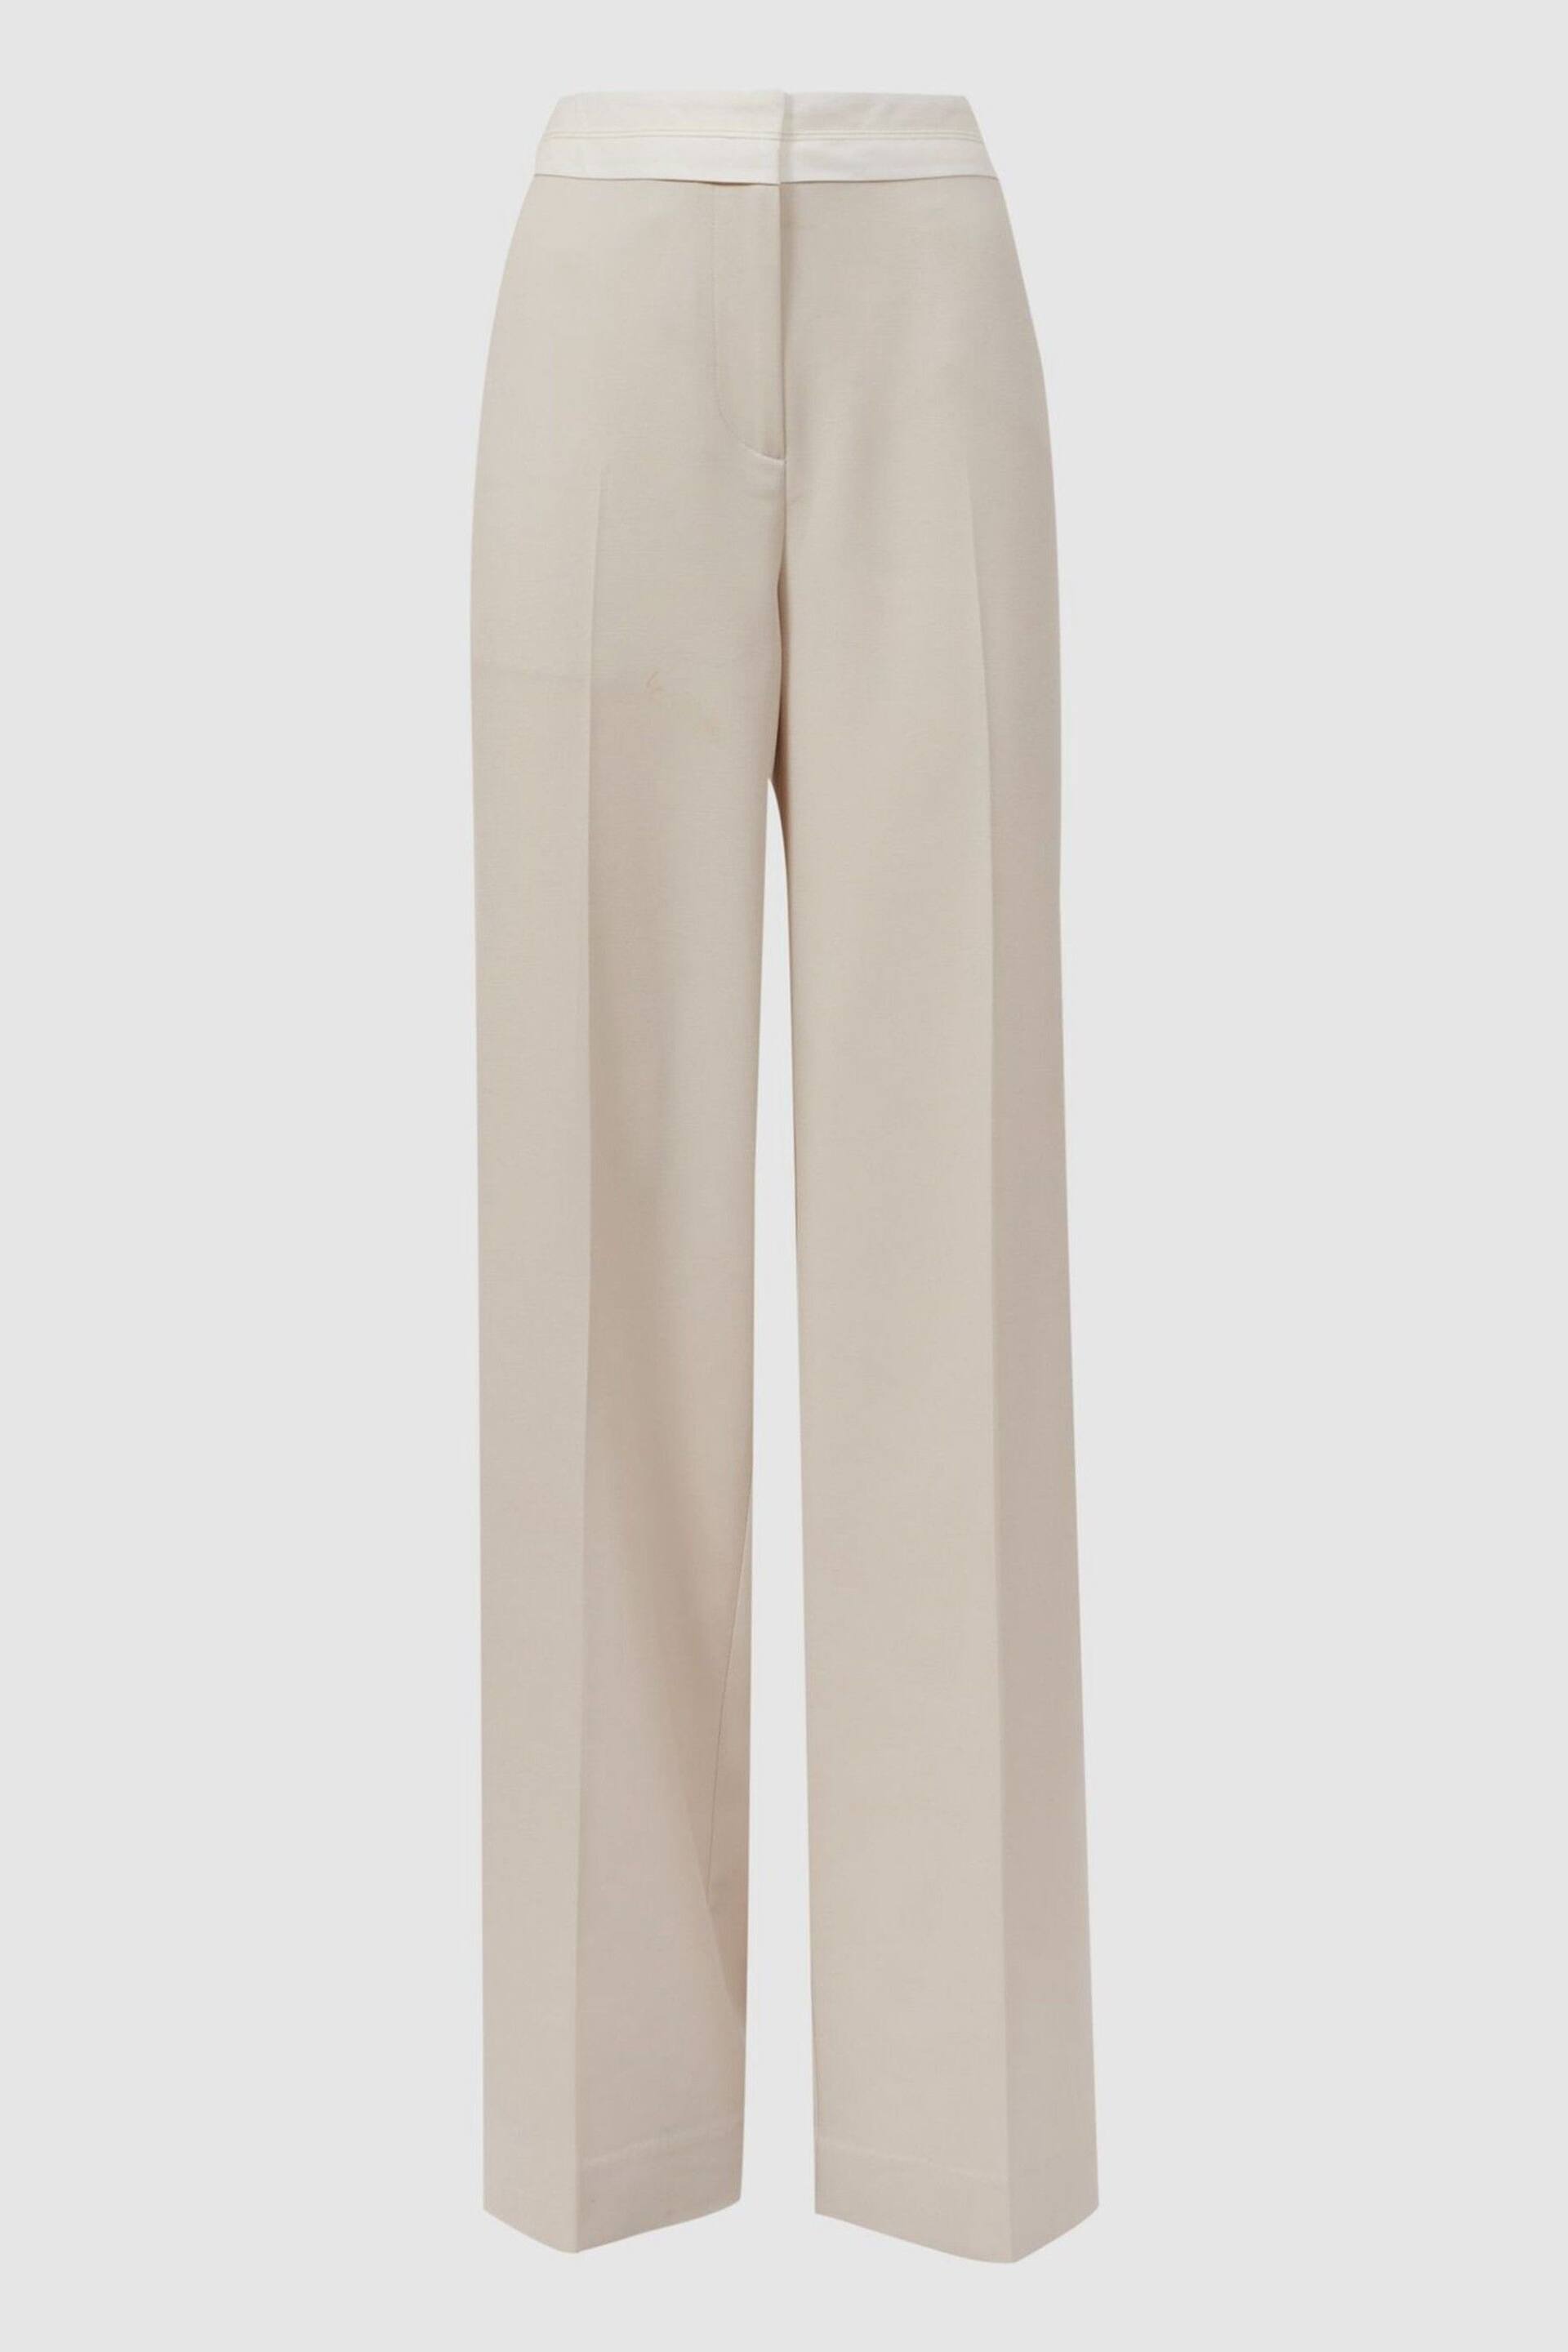 Reiss Neutral Maya Mid Rise Contrast Wide Leg Suit Trousers - Image 2 of 5